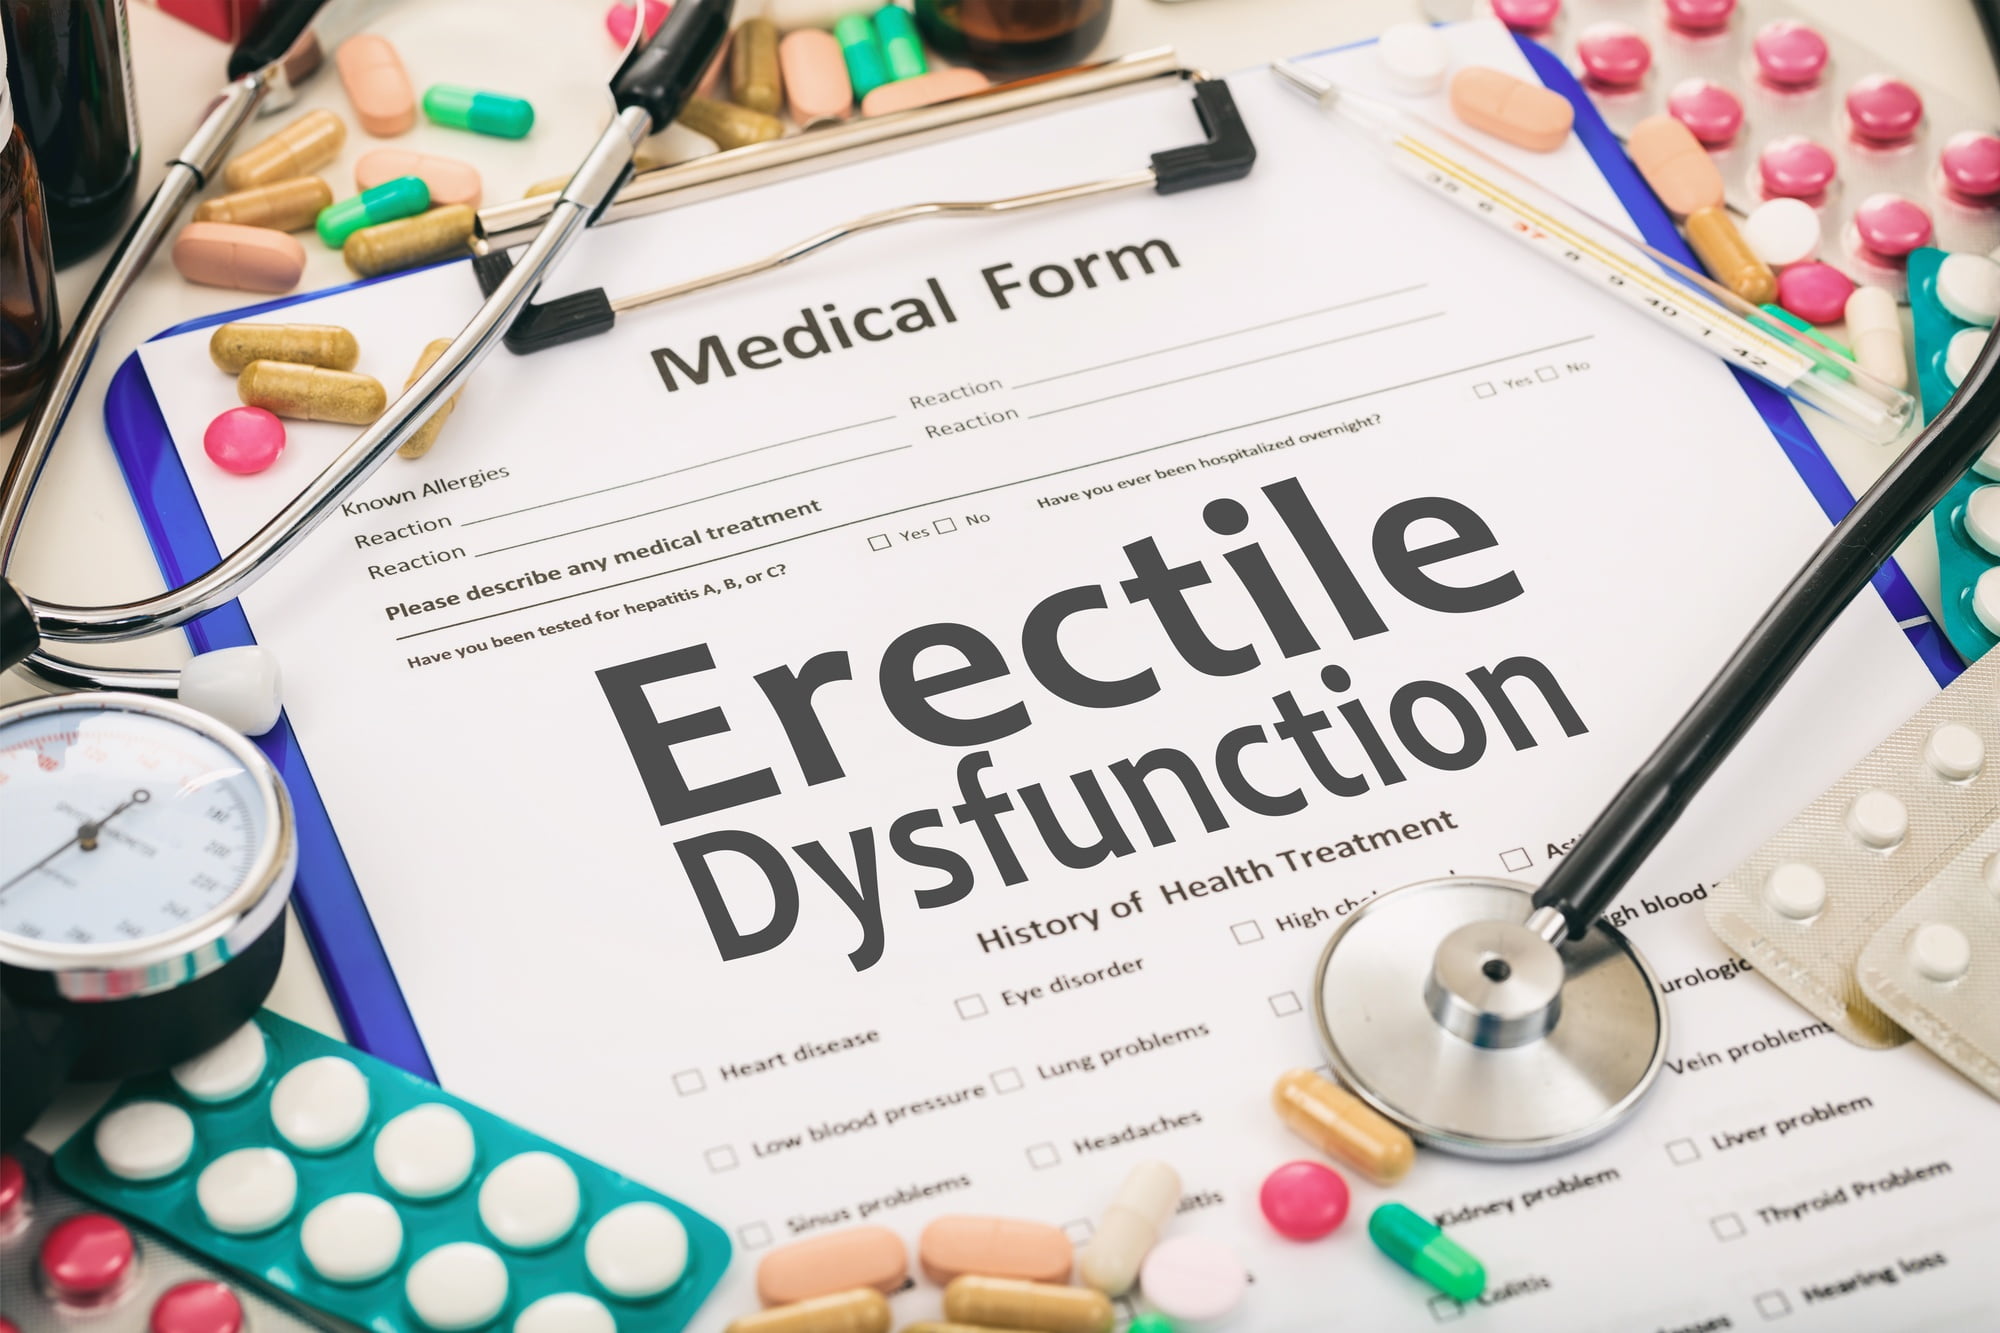 If you're struggling with getting or maintaining an erection, click here to explore a variety of ED solutions that are available.